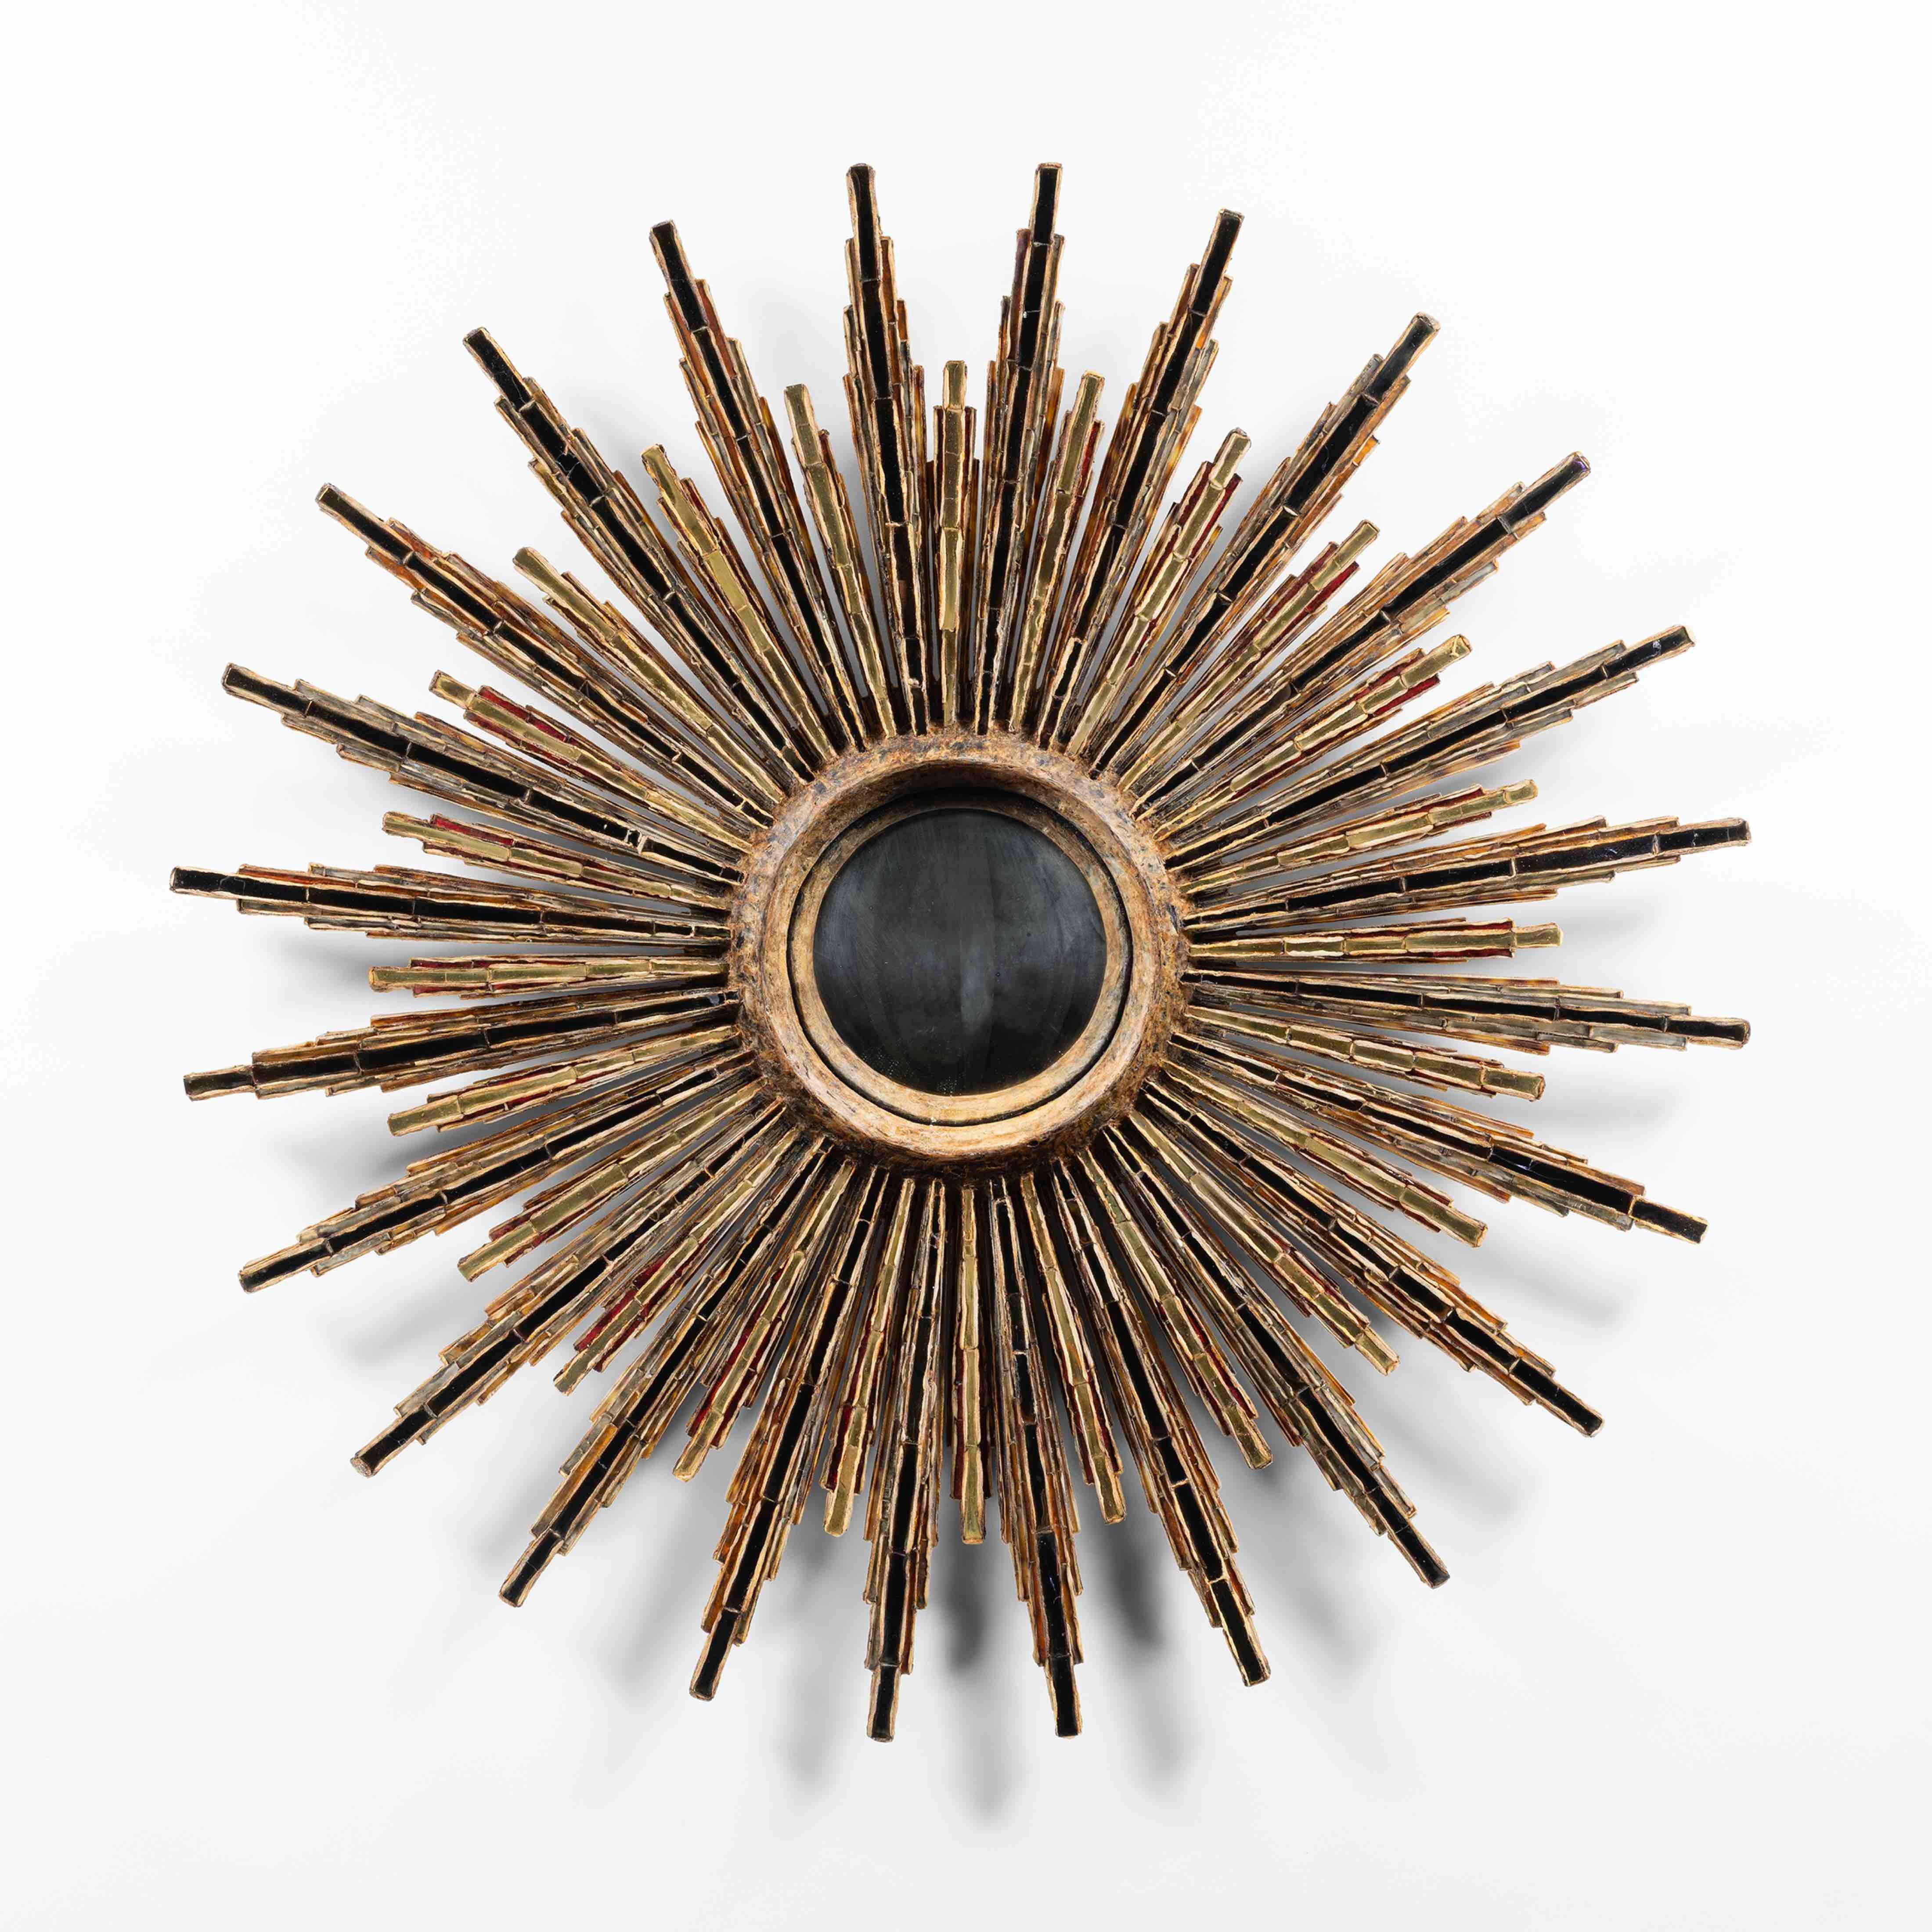 “Roi Soleil” by Line Vautrin – Talosel mirror
Light brown talosel structure whose rays (24 large rays, 24 small) are encrusted with alternating bronze, gold and red mirrors.
A thick circle of talosel surrounding the witch central mirror. The edges